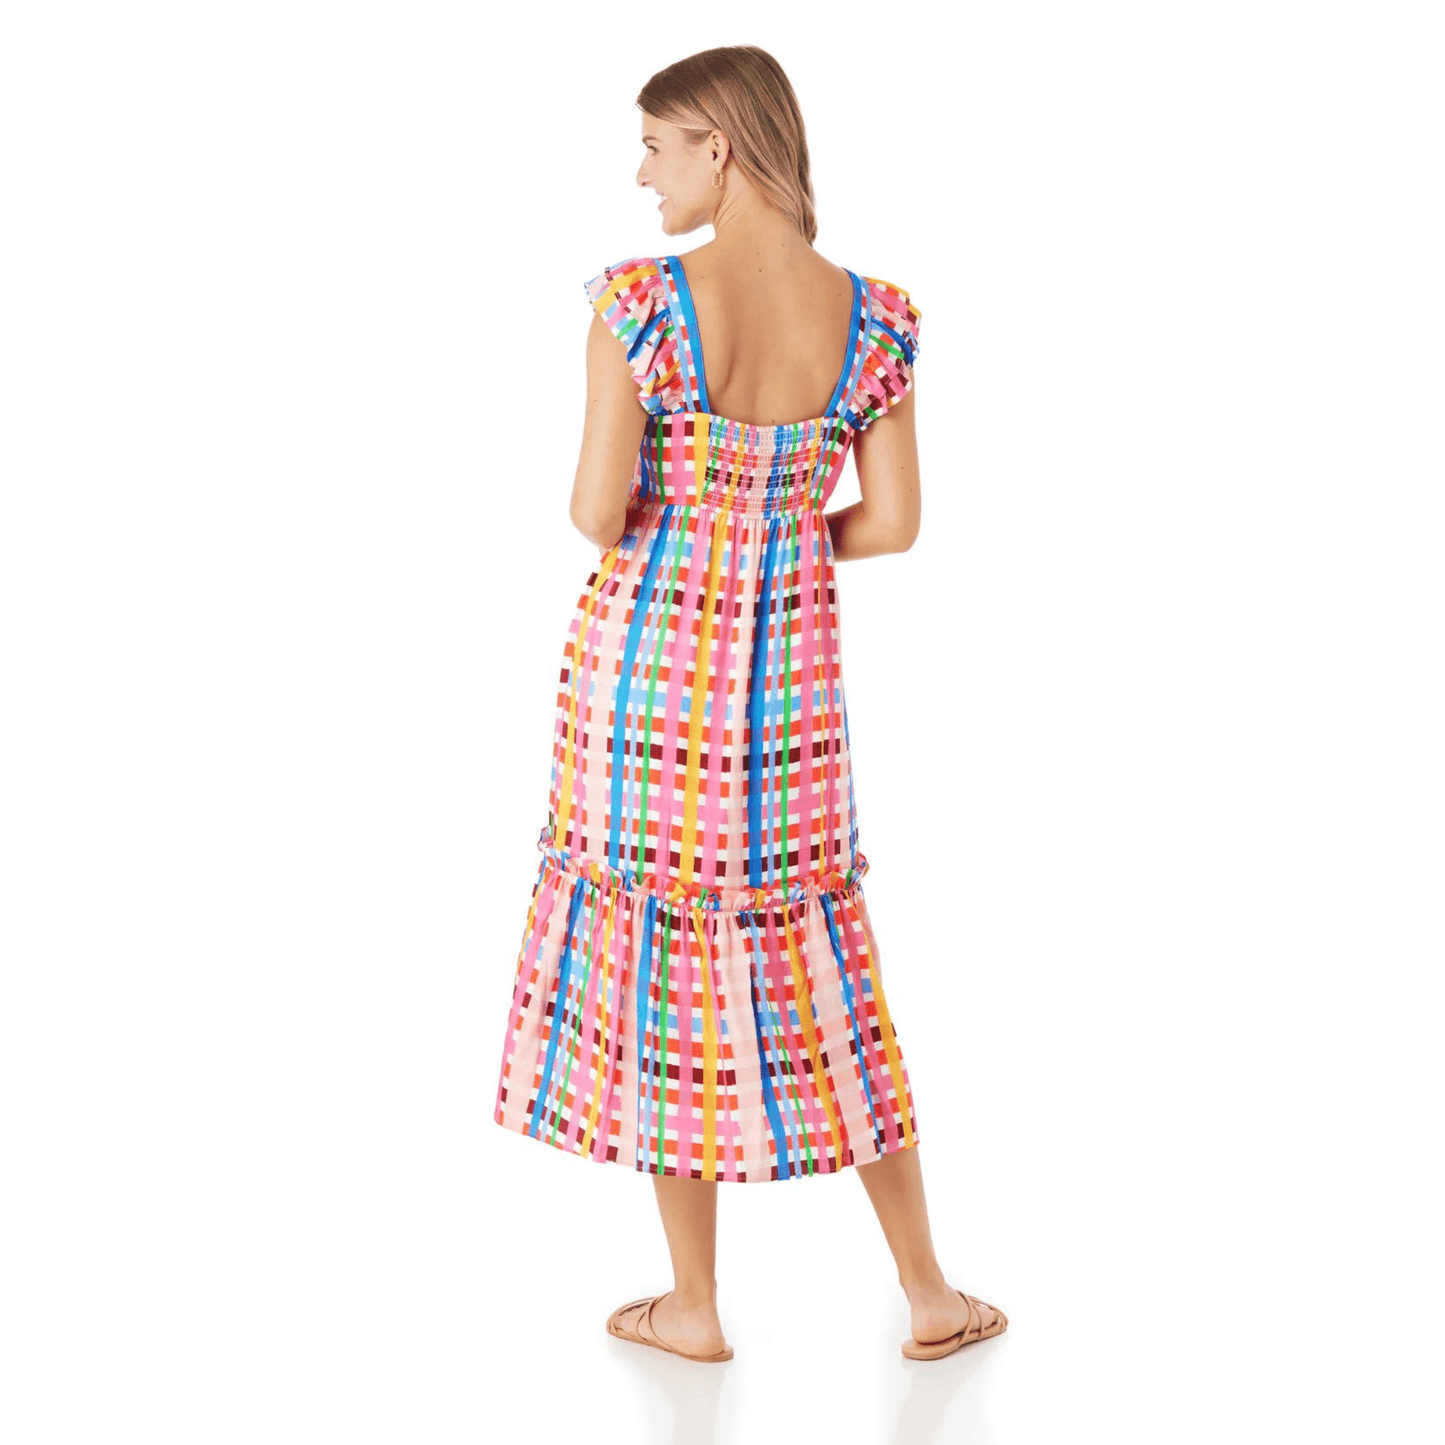 Bryce Dress in Picnic Plaid - Fairley Fancy 